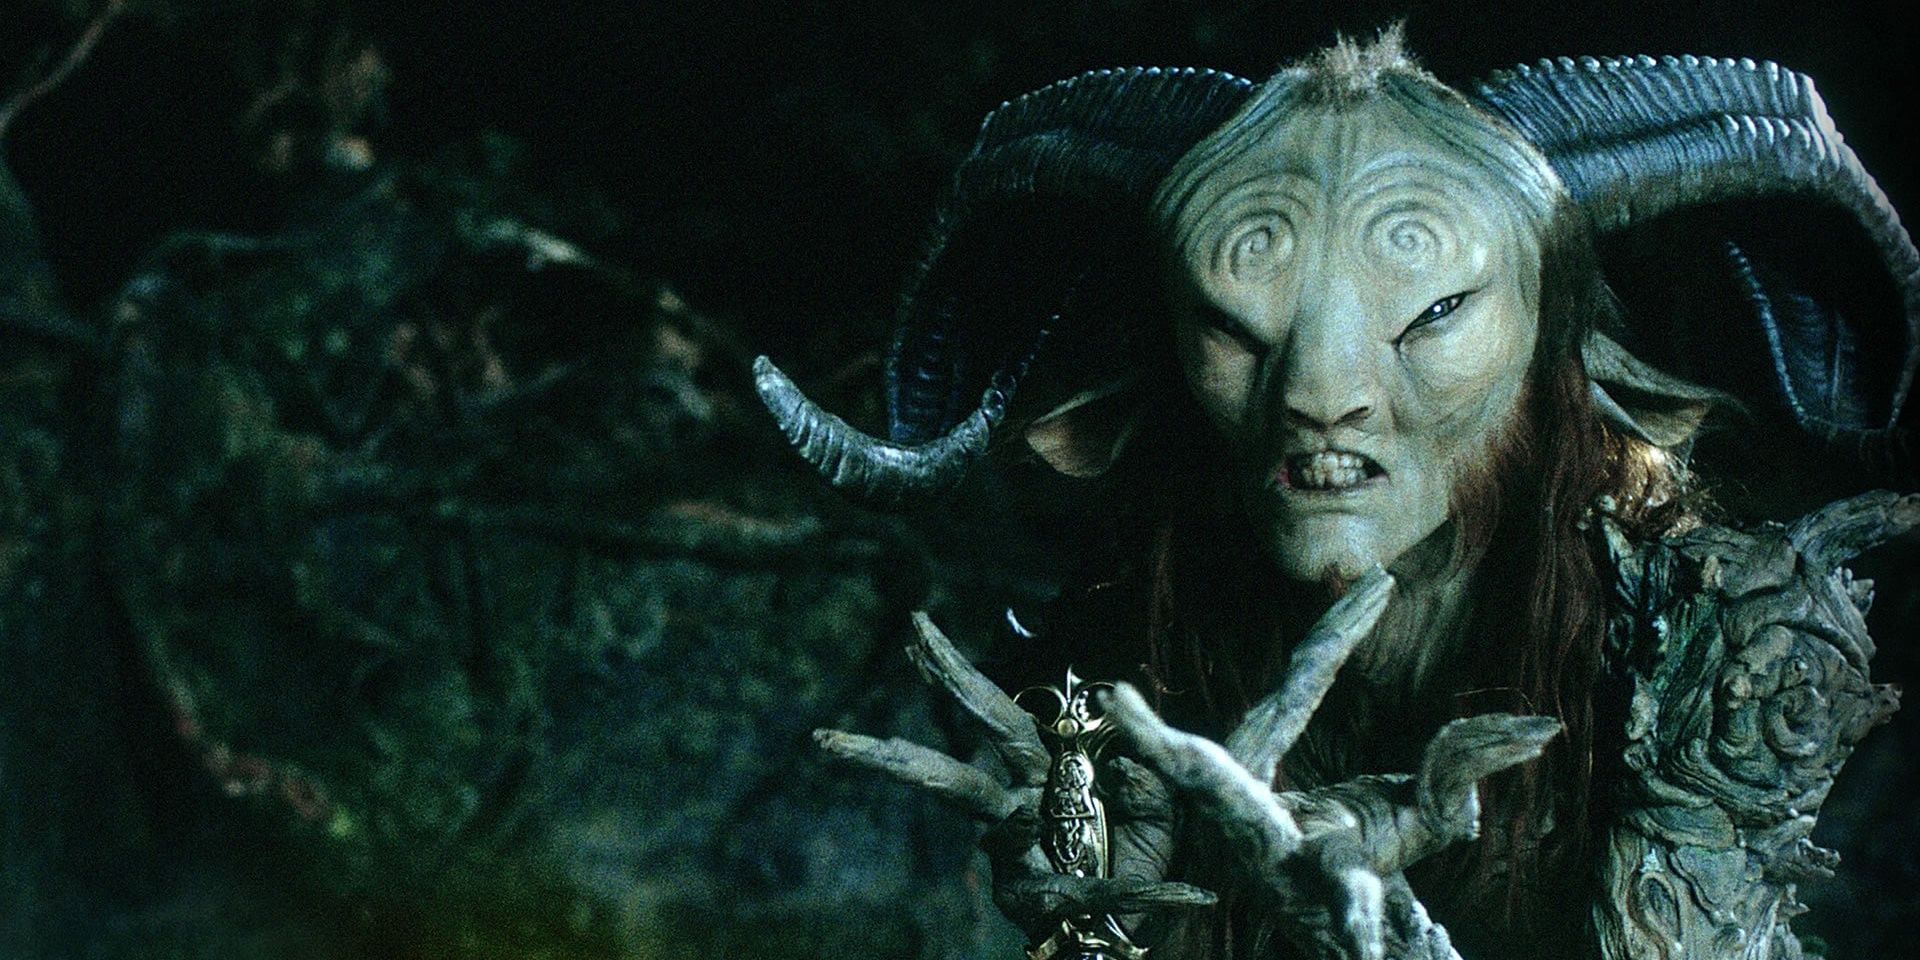 The Faun in Pan's Labyrinth